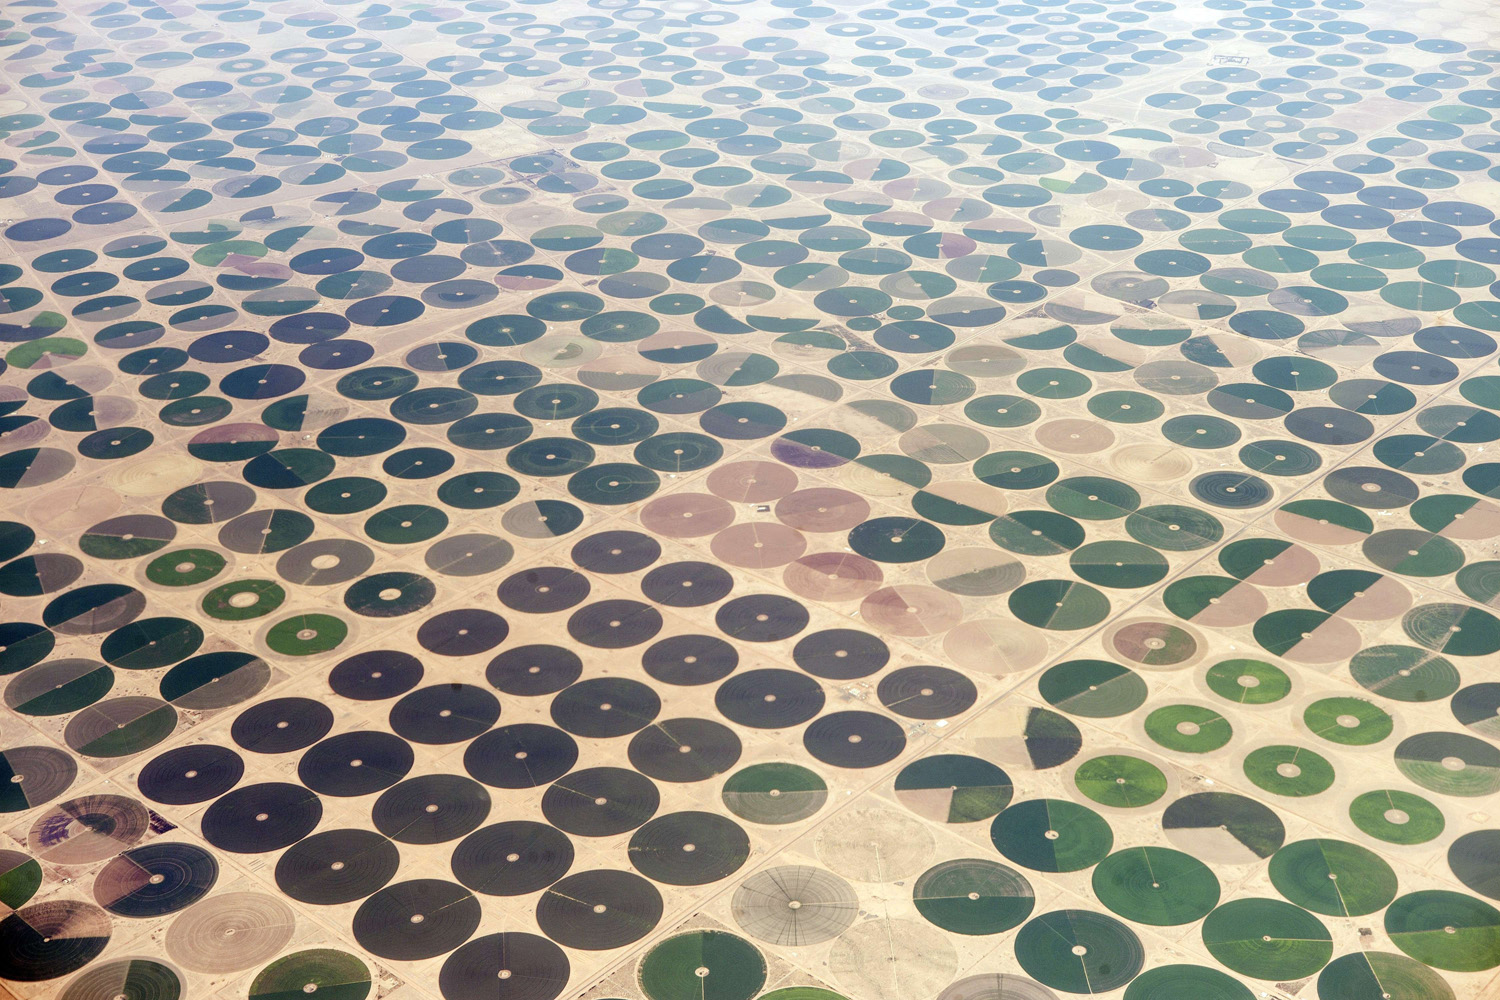 Sept. 11, 2014. A general view taken from an airplane on shows cultured farms in northern Saudi Arabia.